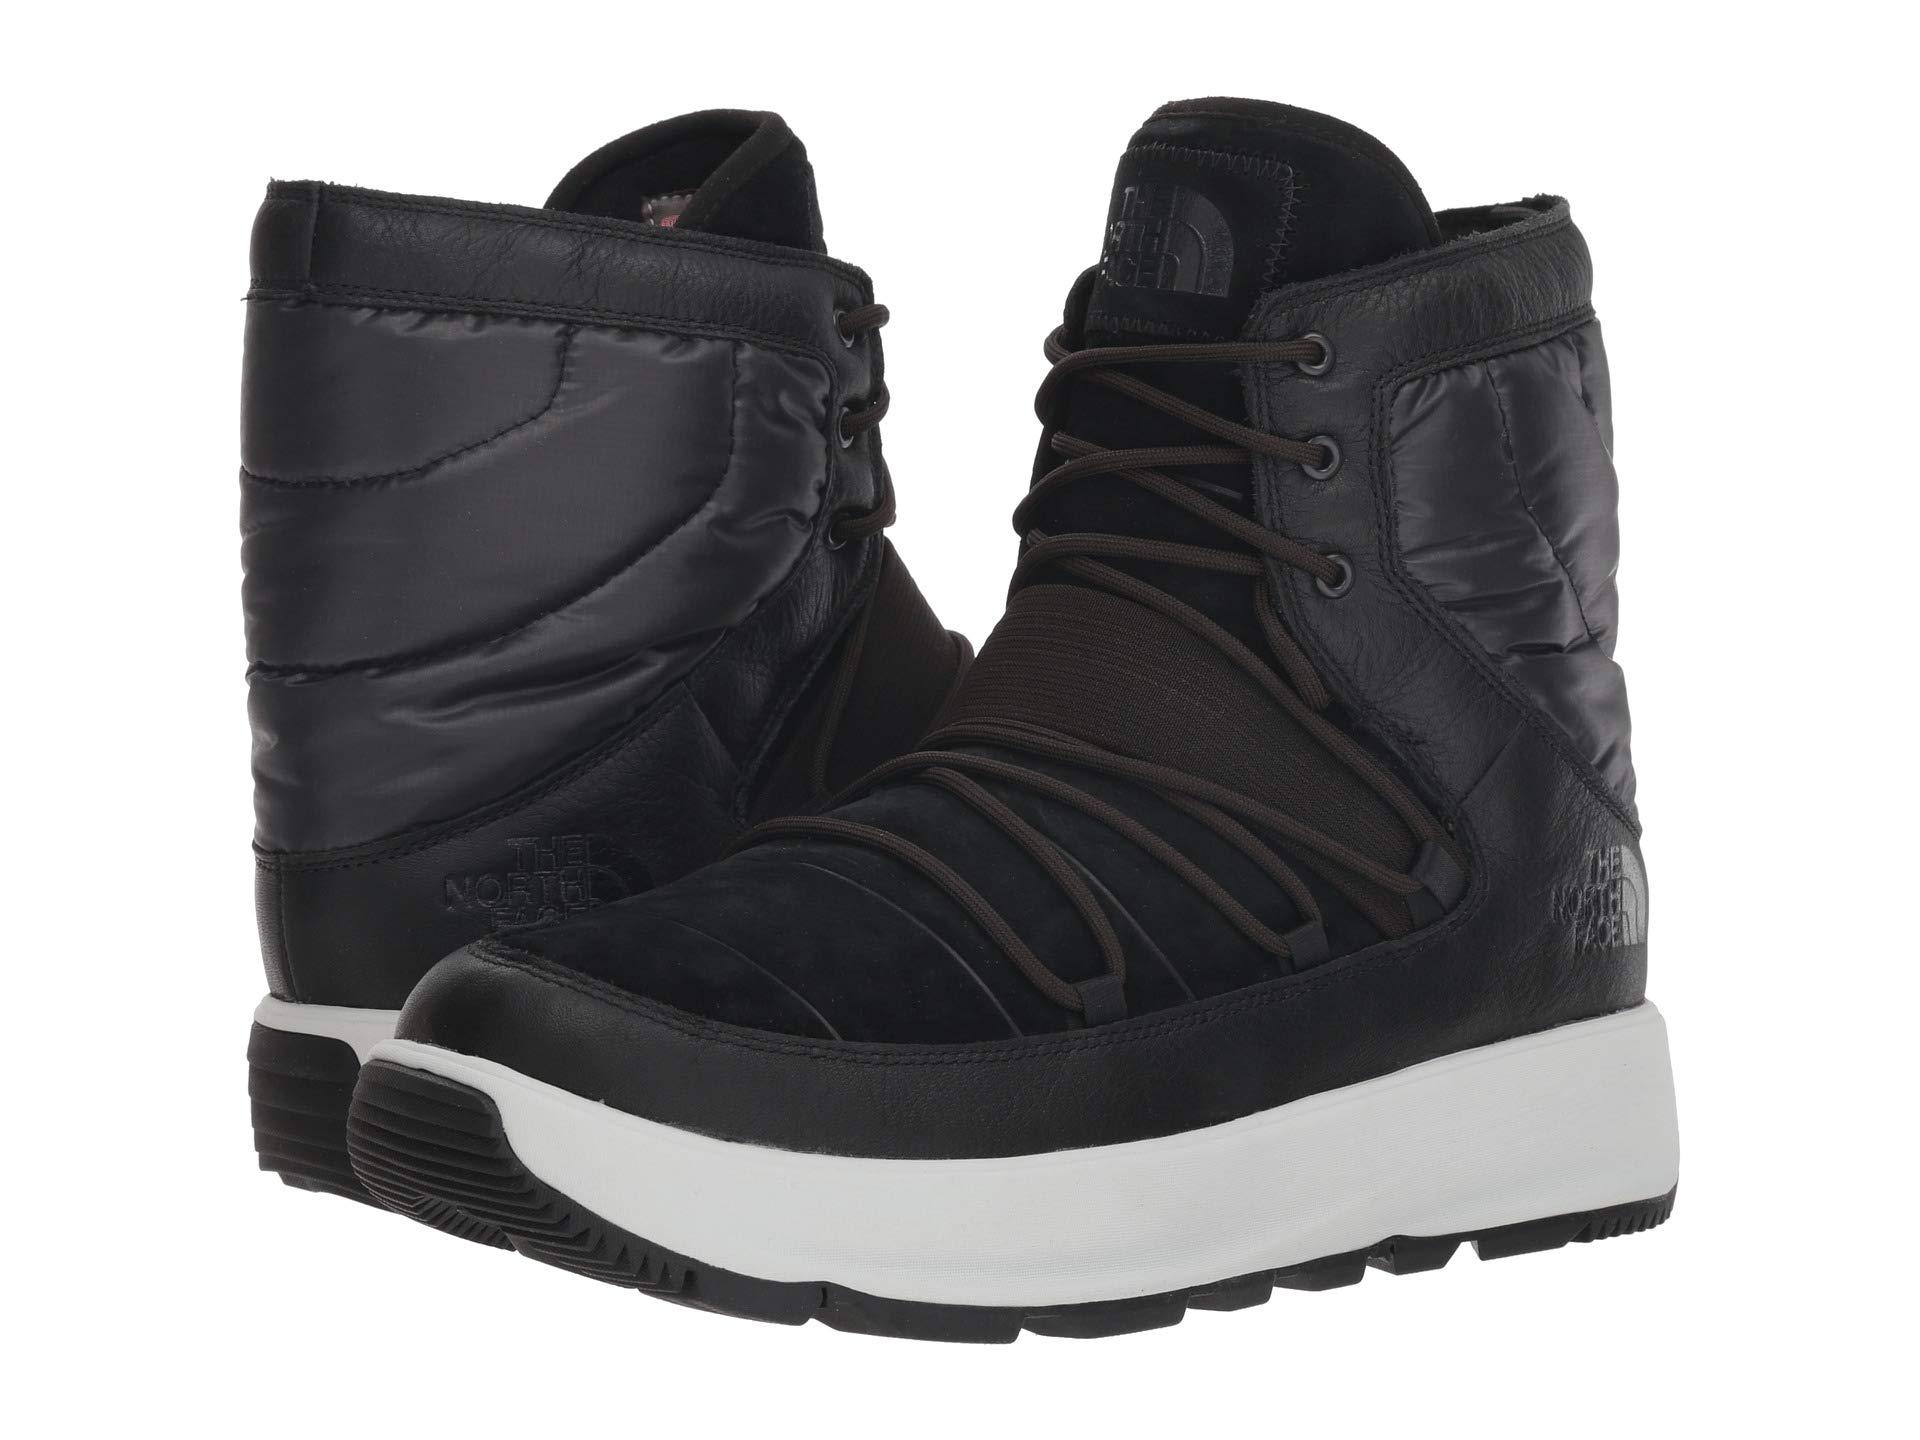 north face ozone park winter boots